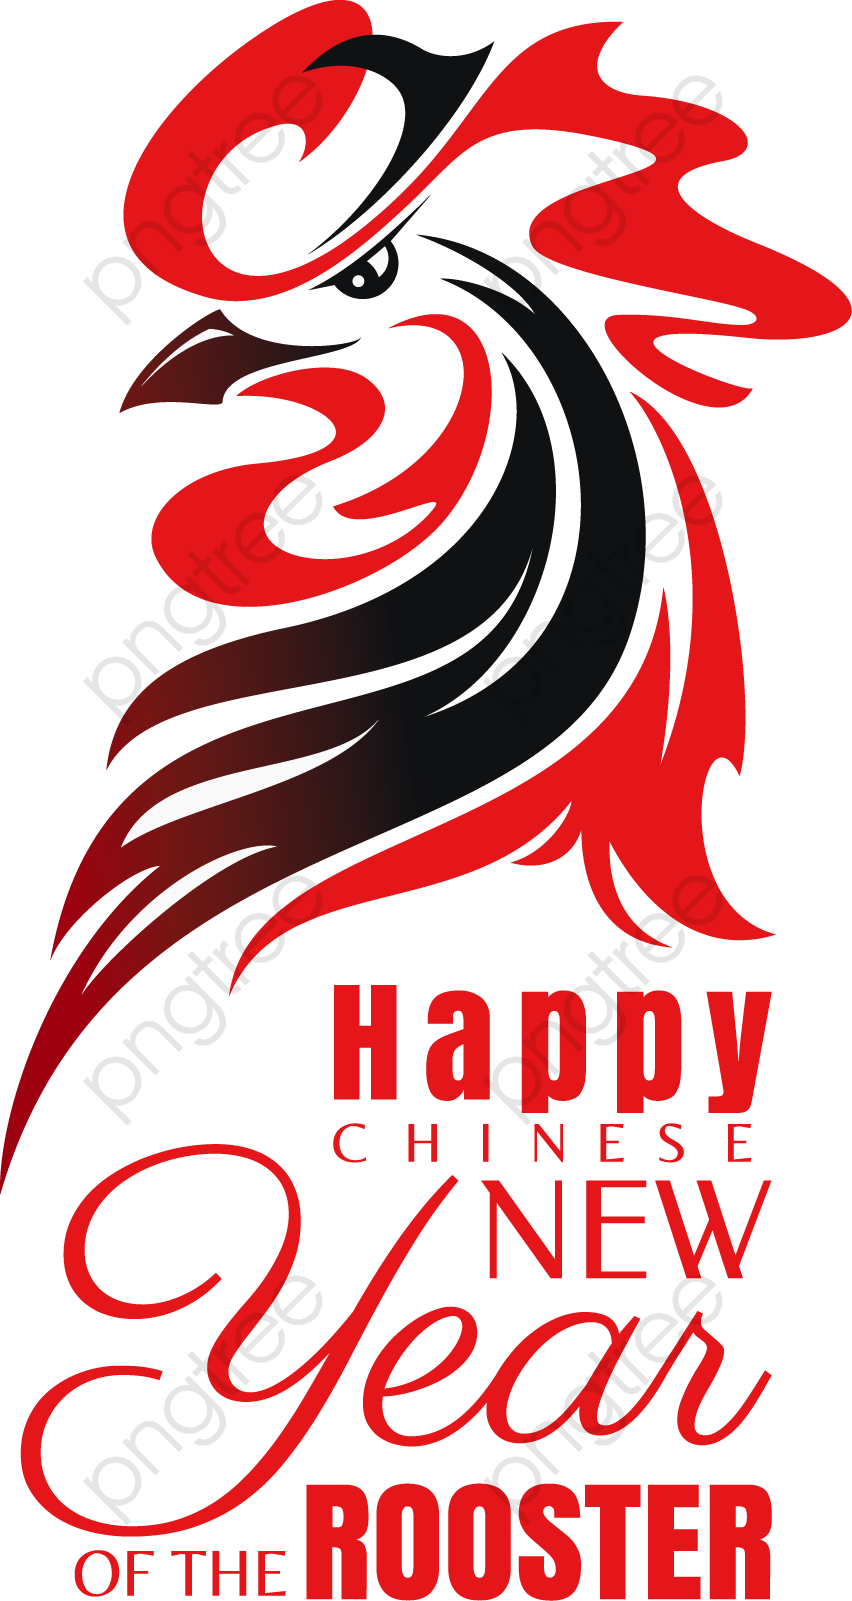 A Red And Black Rooster With Text